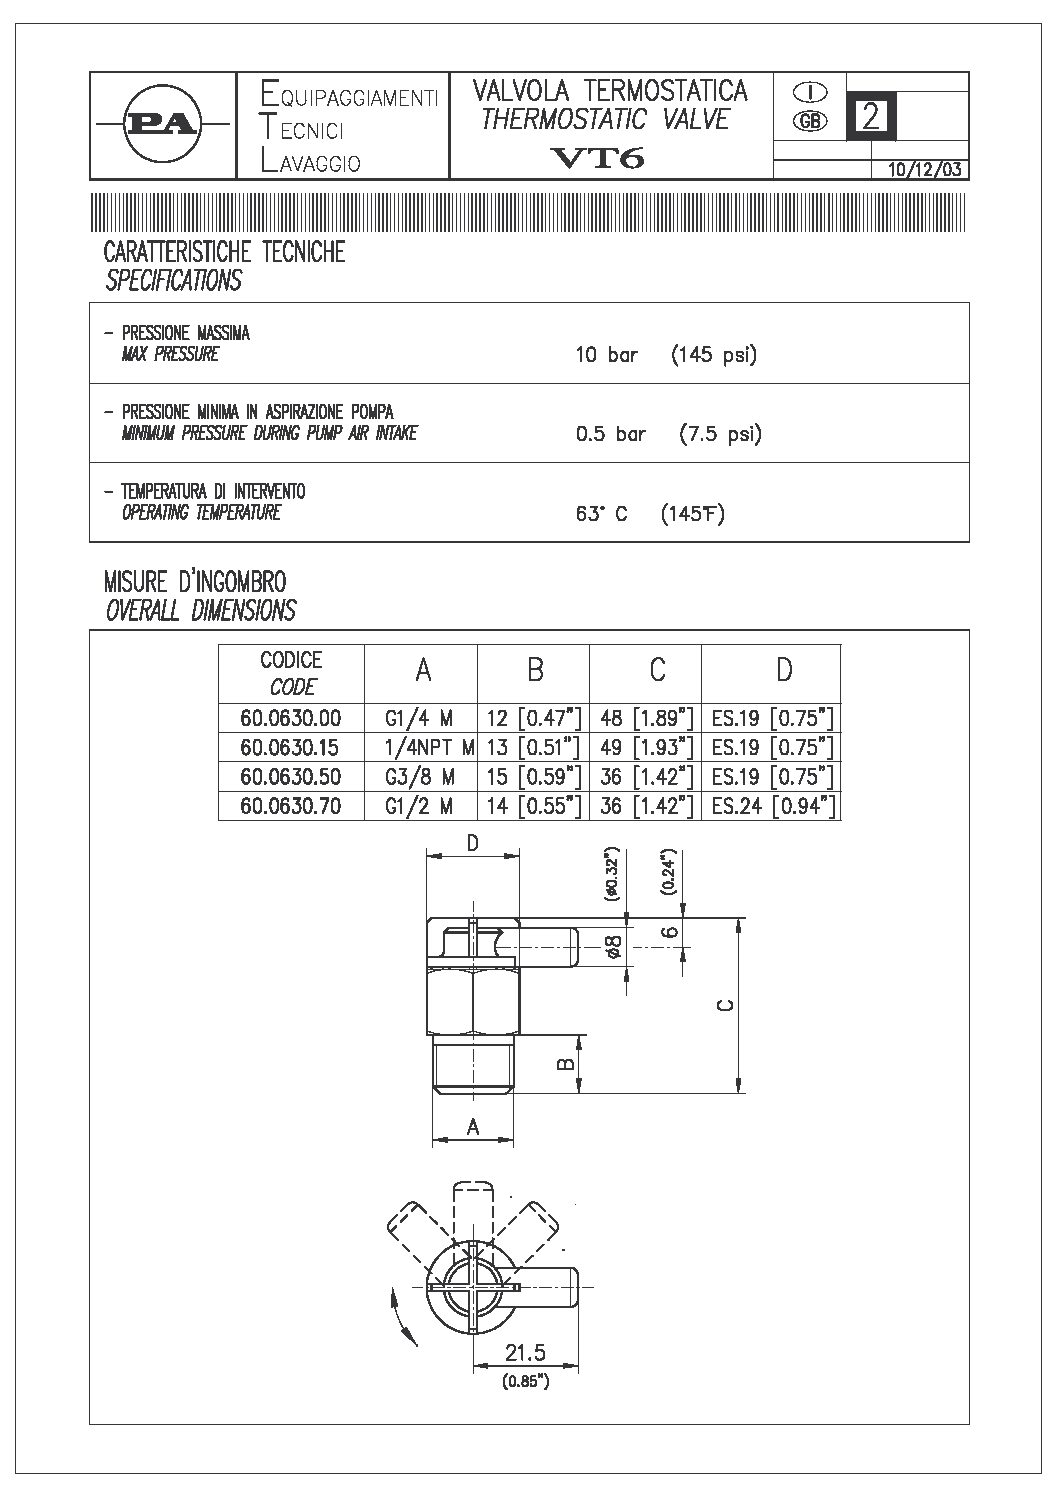 PA Thermal Protection Valve technical manual